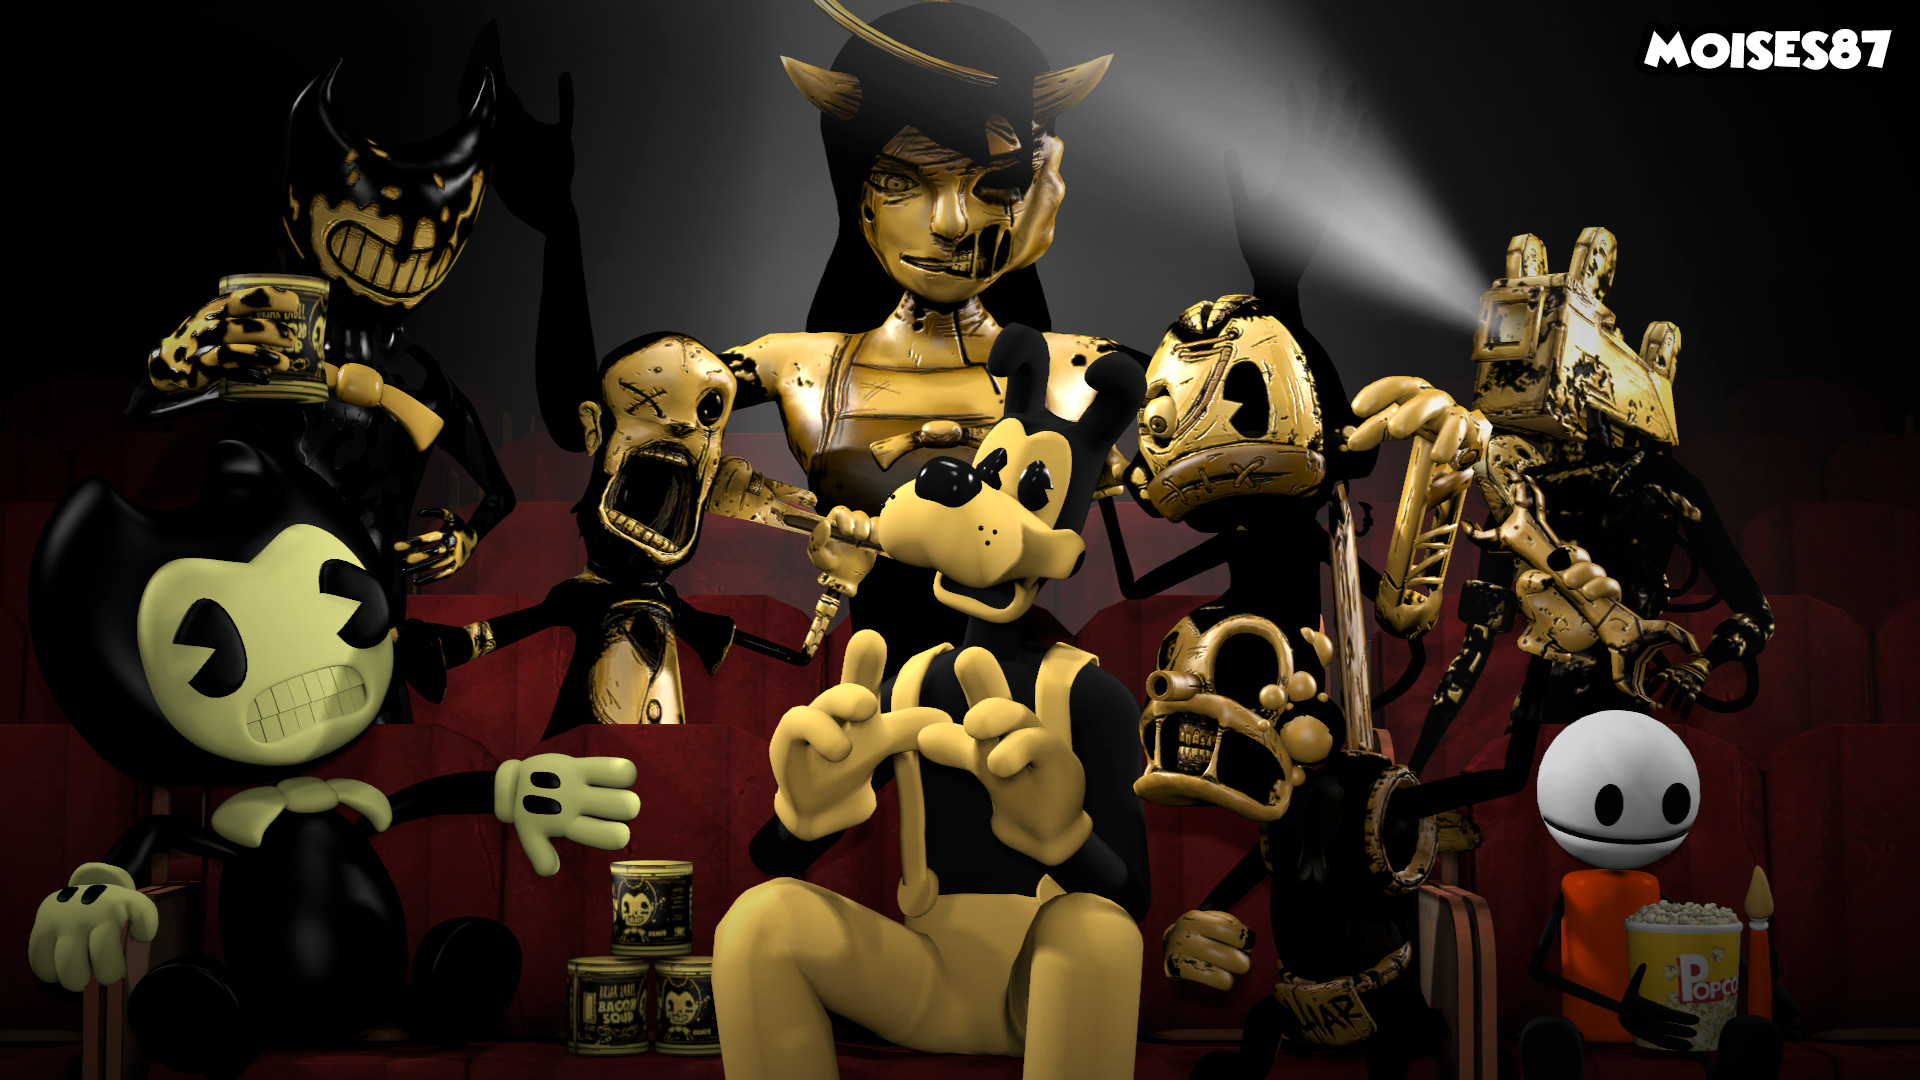 1920x1080 ... Bendy and the Ink machine Wallpaper 3 [SFM] by Moises87